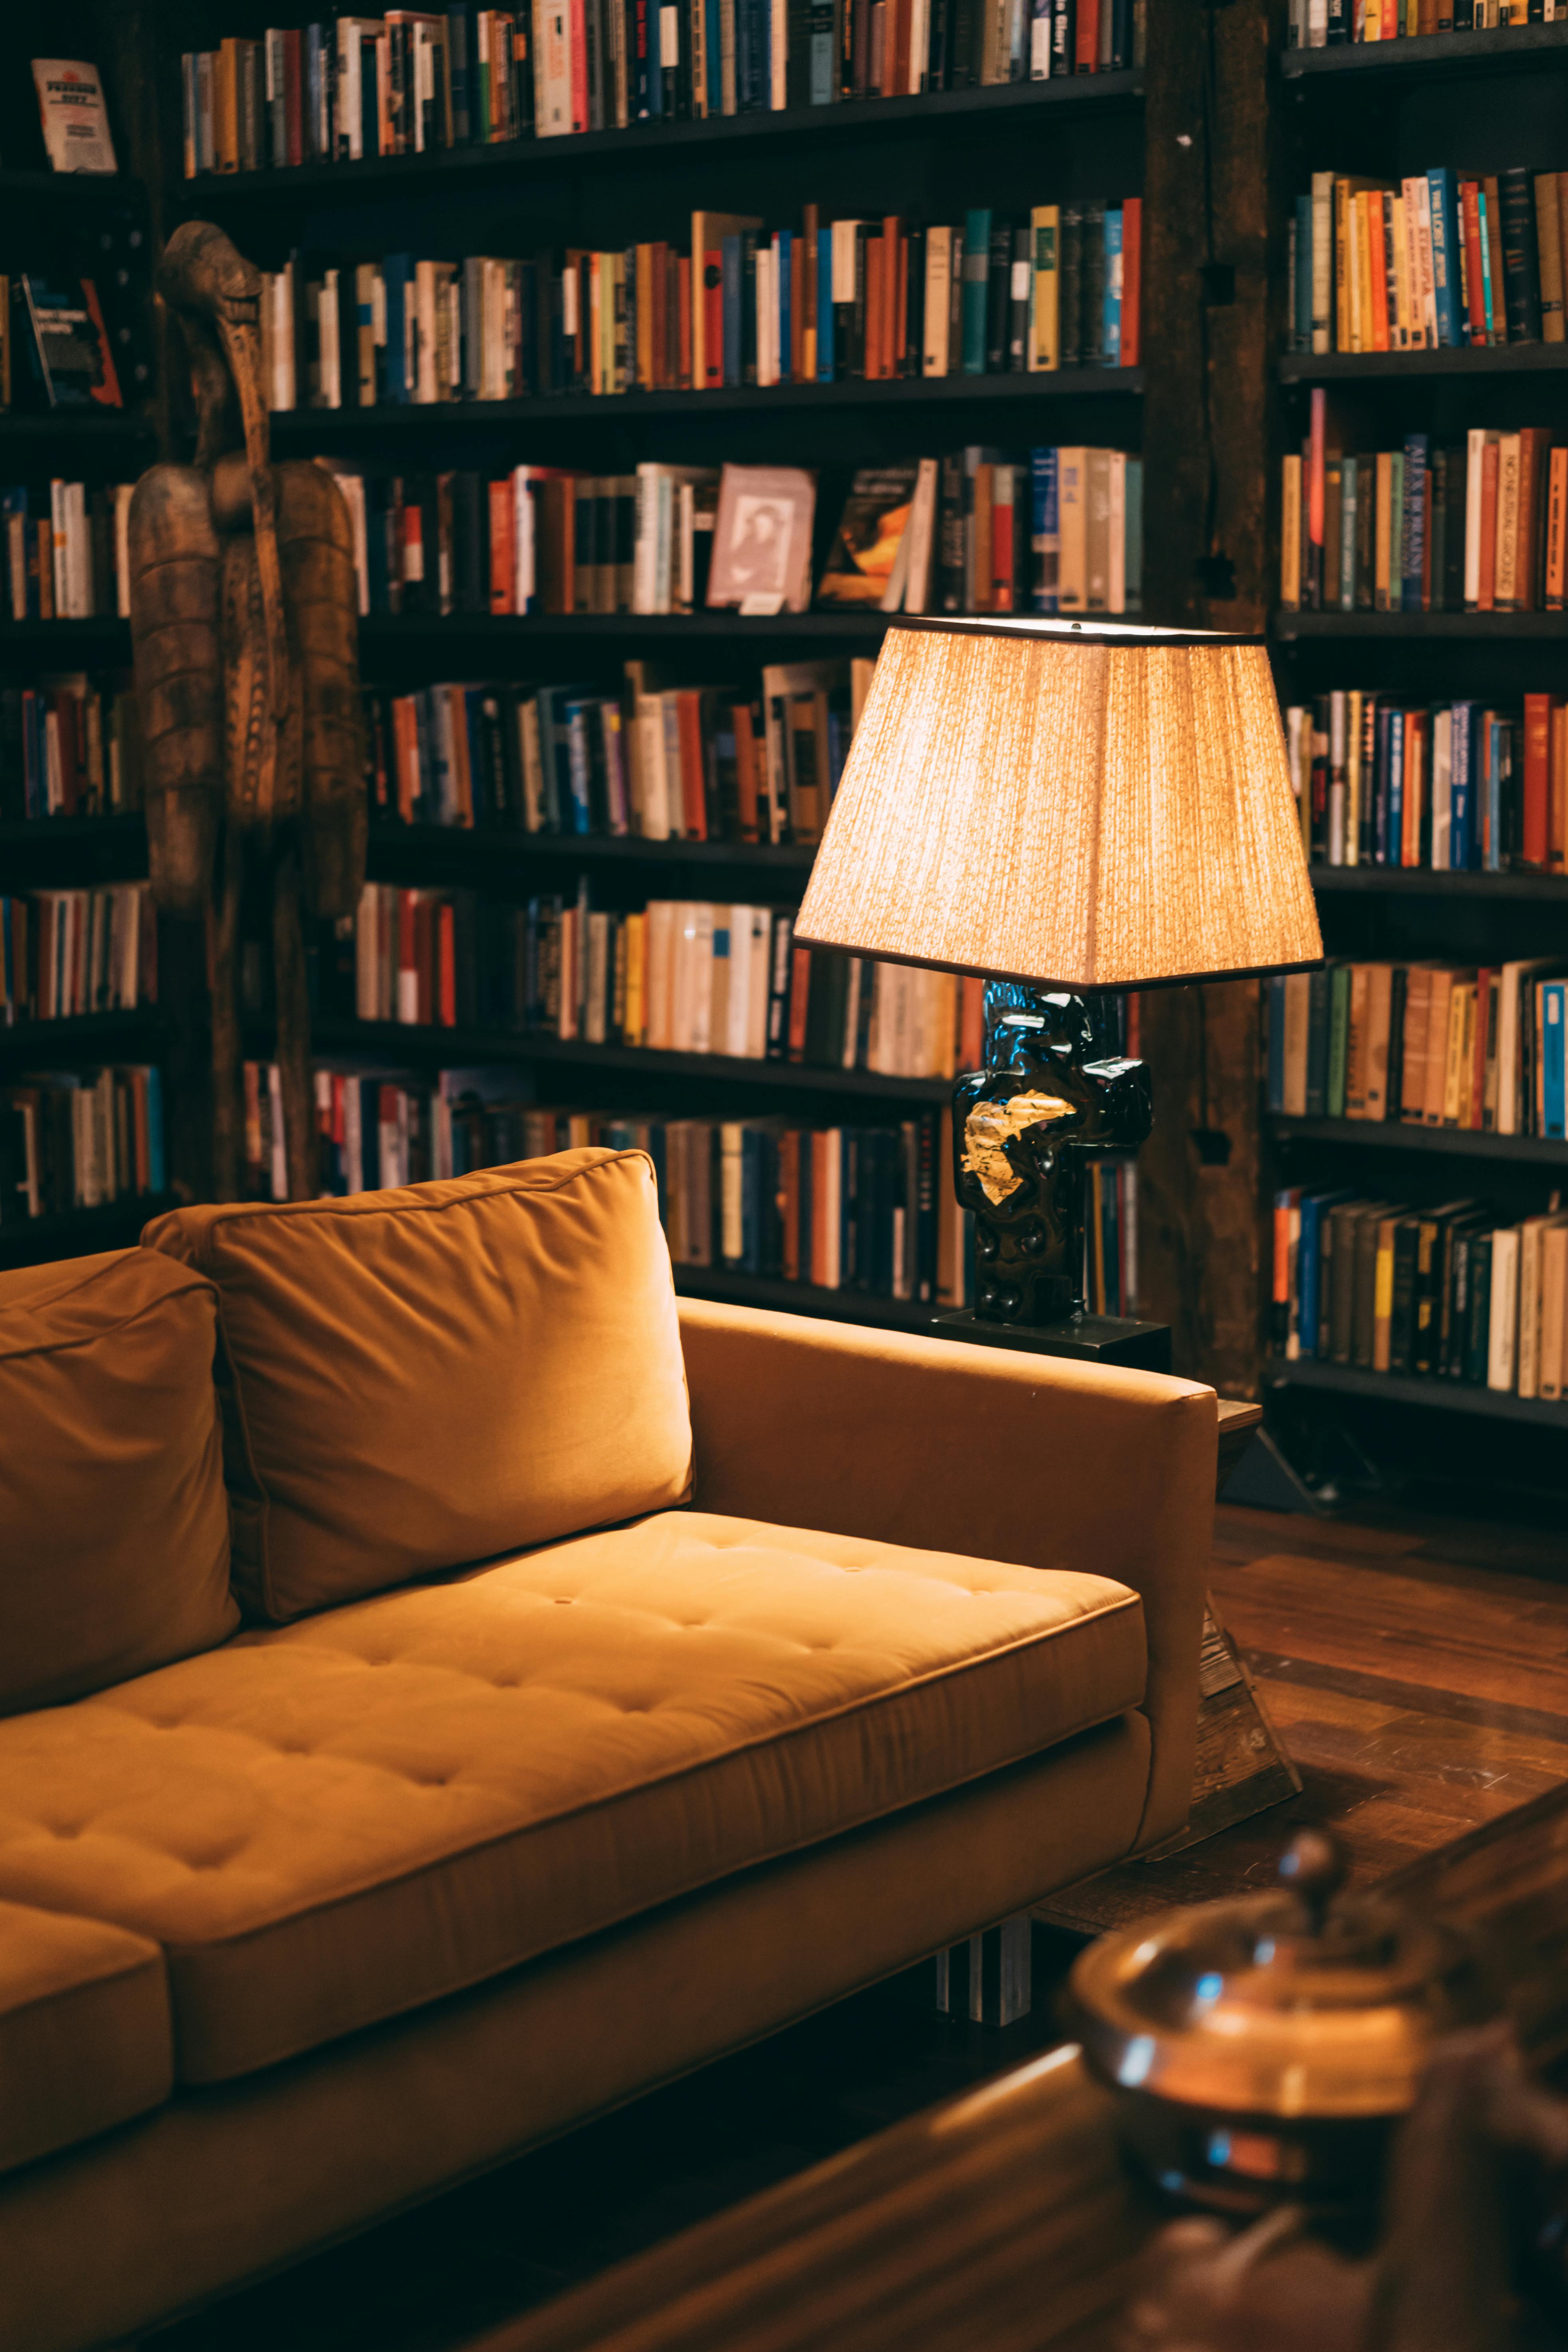 A private library | Source: Pexels